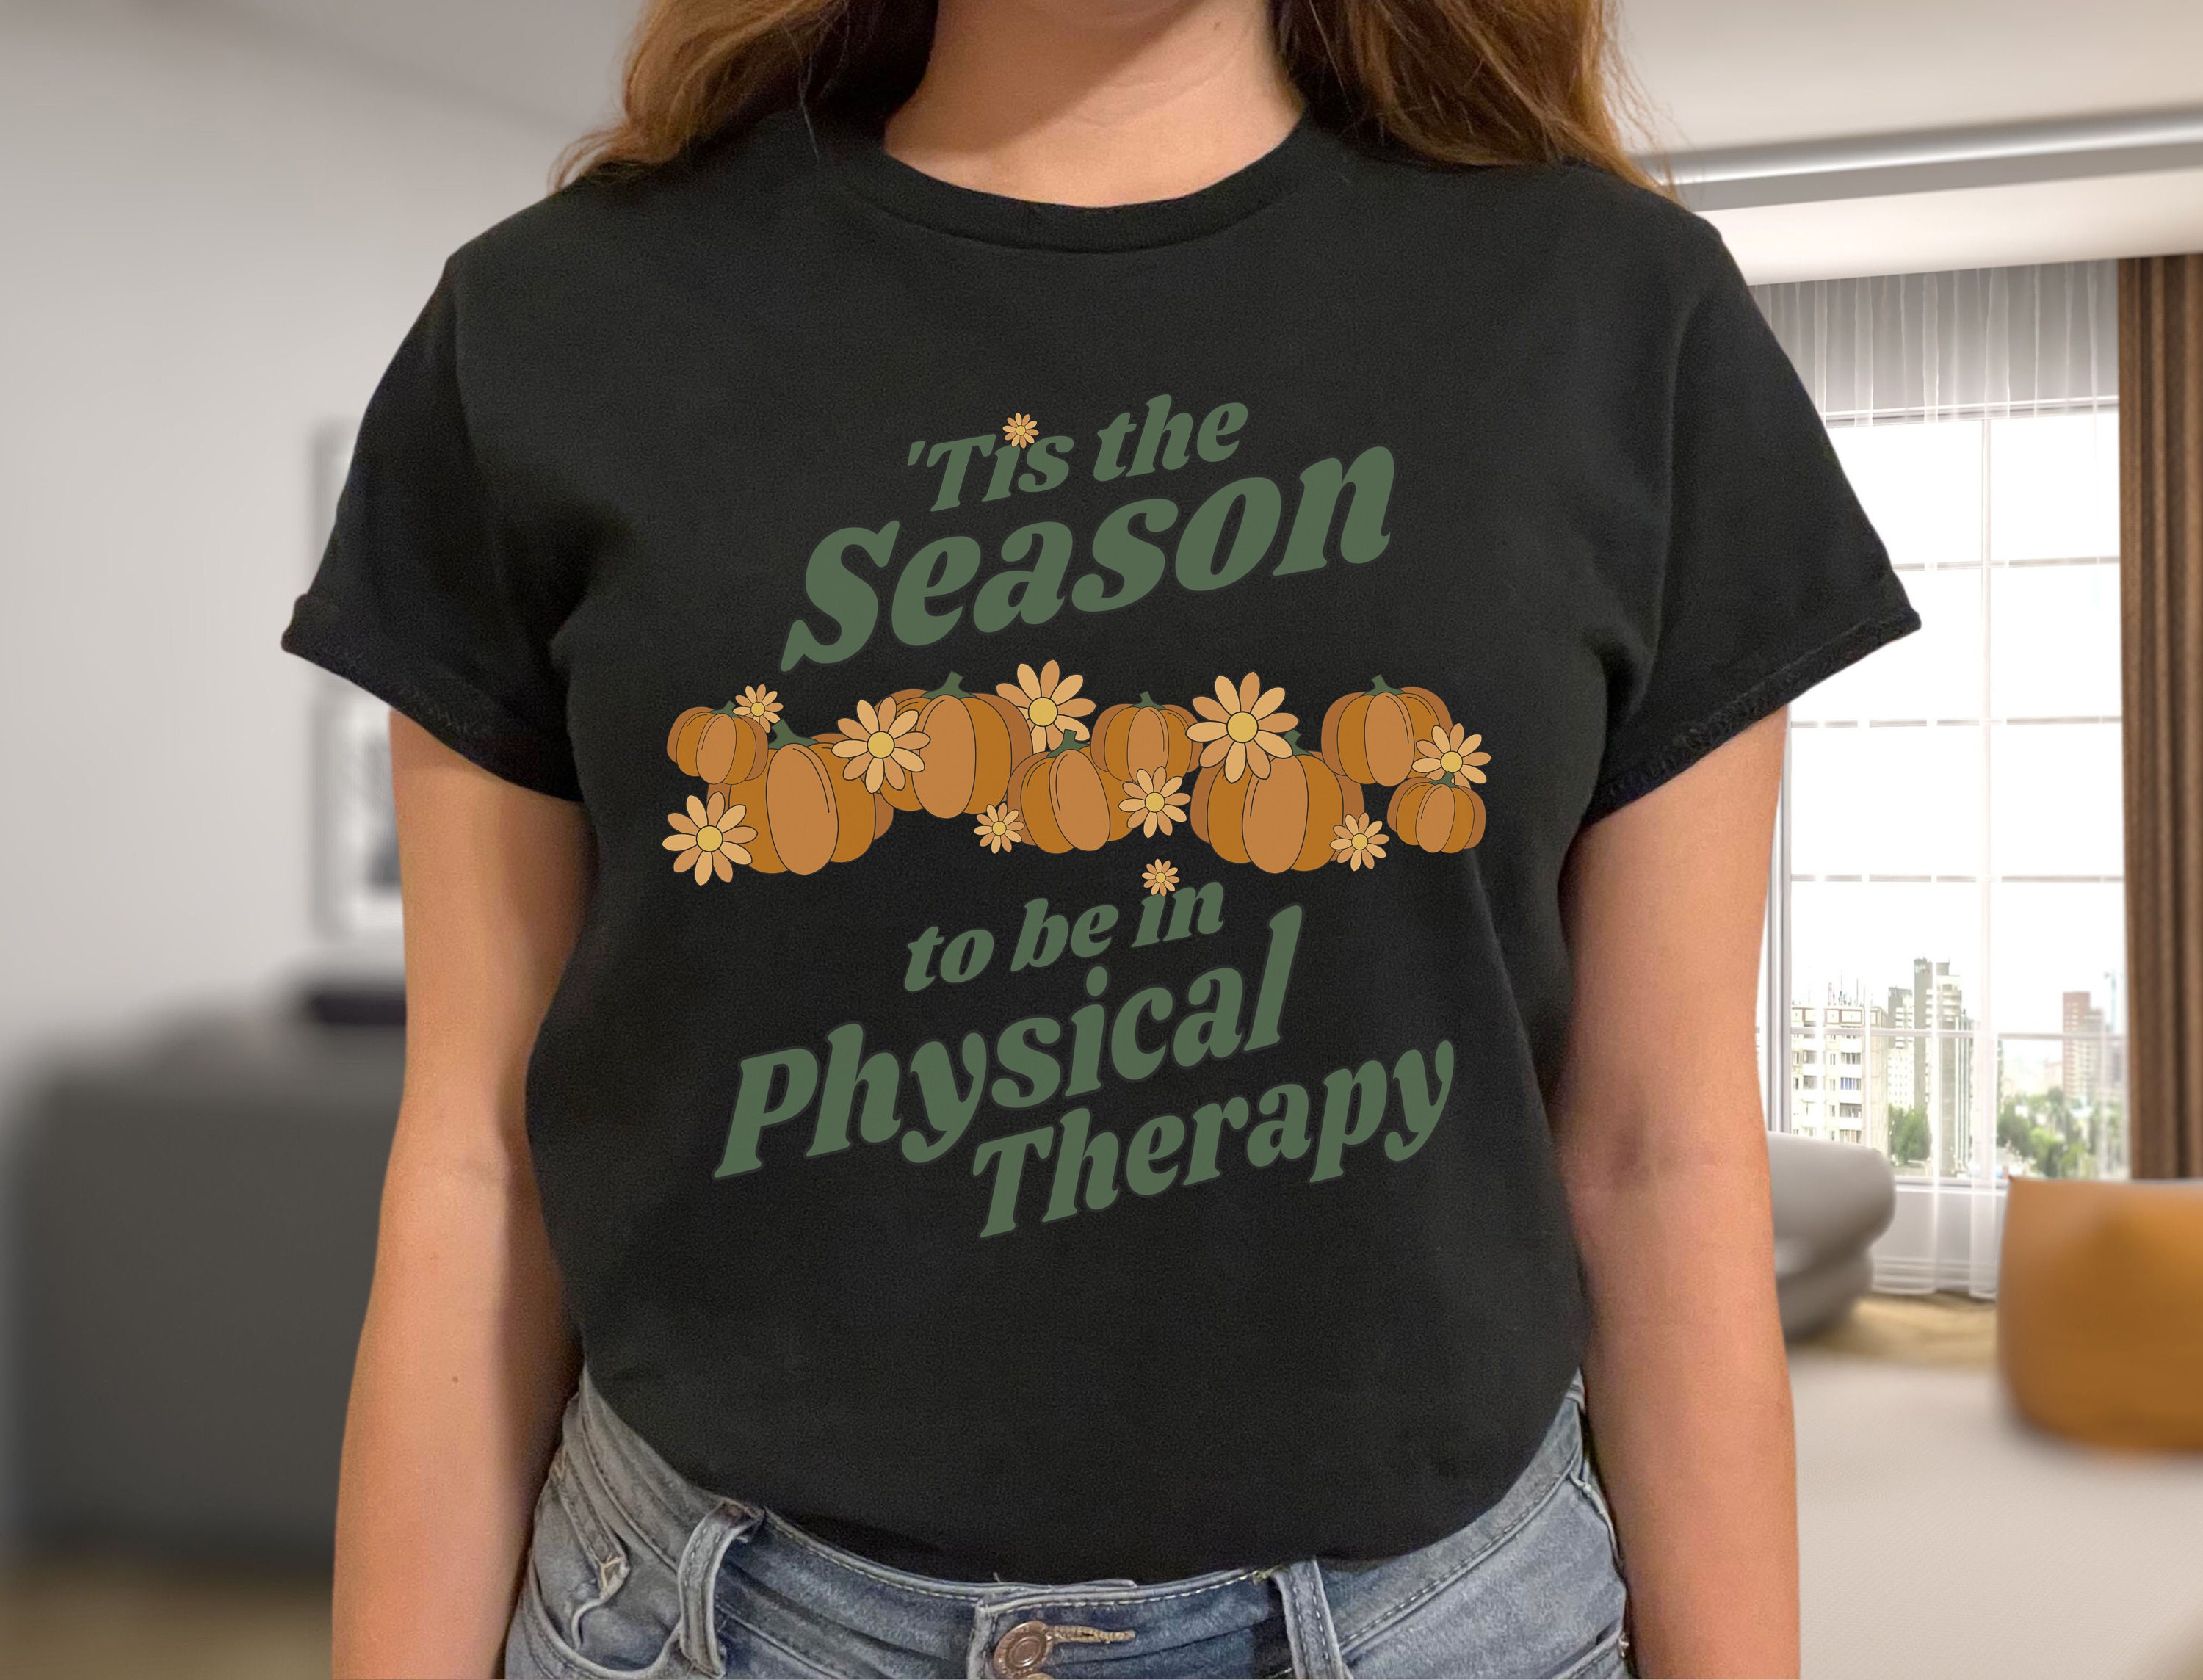 Discover Physical therapy shirt, physical therapist fall shirt, PT pumpkin shirt, Physical therapist gift, PT gift, teacher clothes, PT sweatshirt